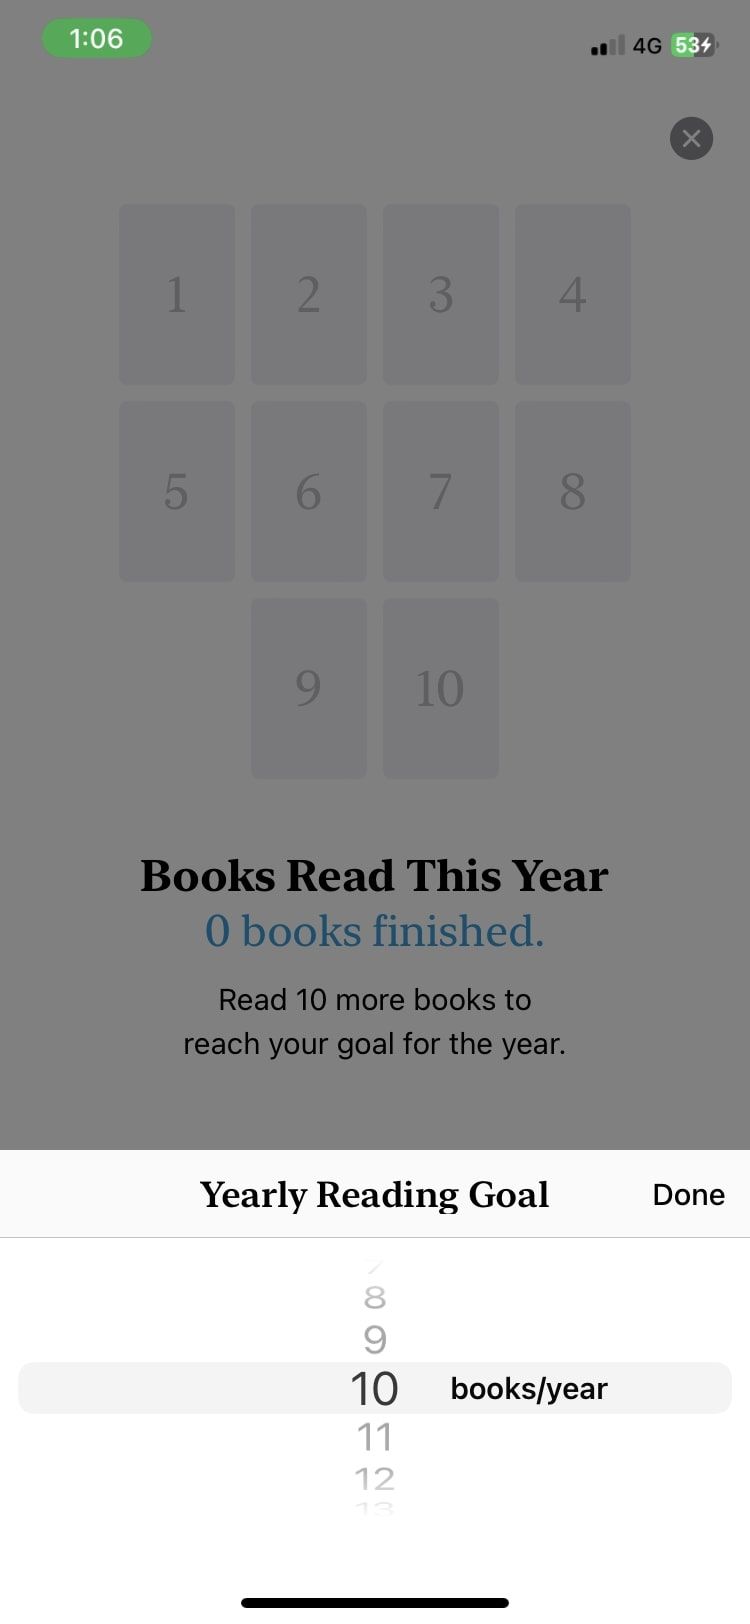 yearly goal done option in Apple Books